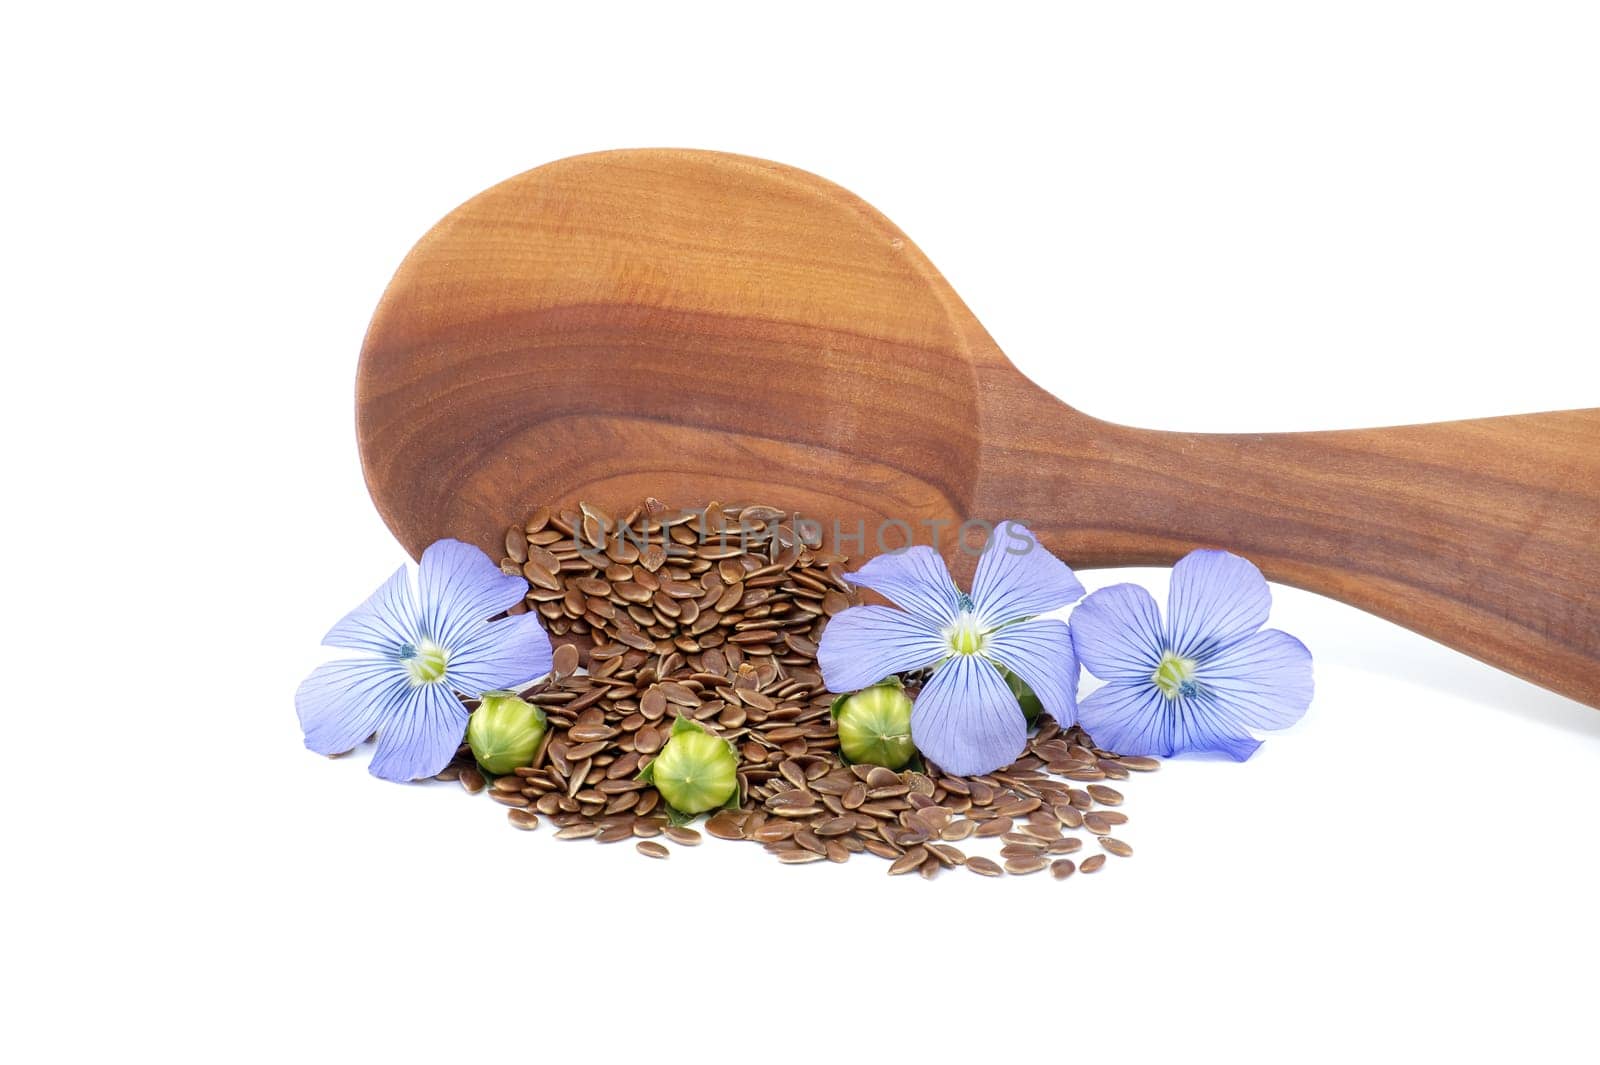 Flax (linseed) flower and seeds on white background by NetPix